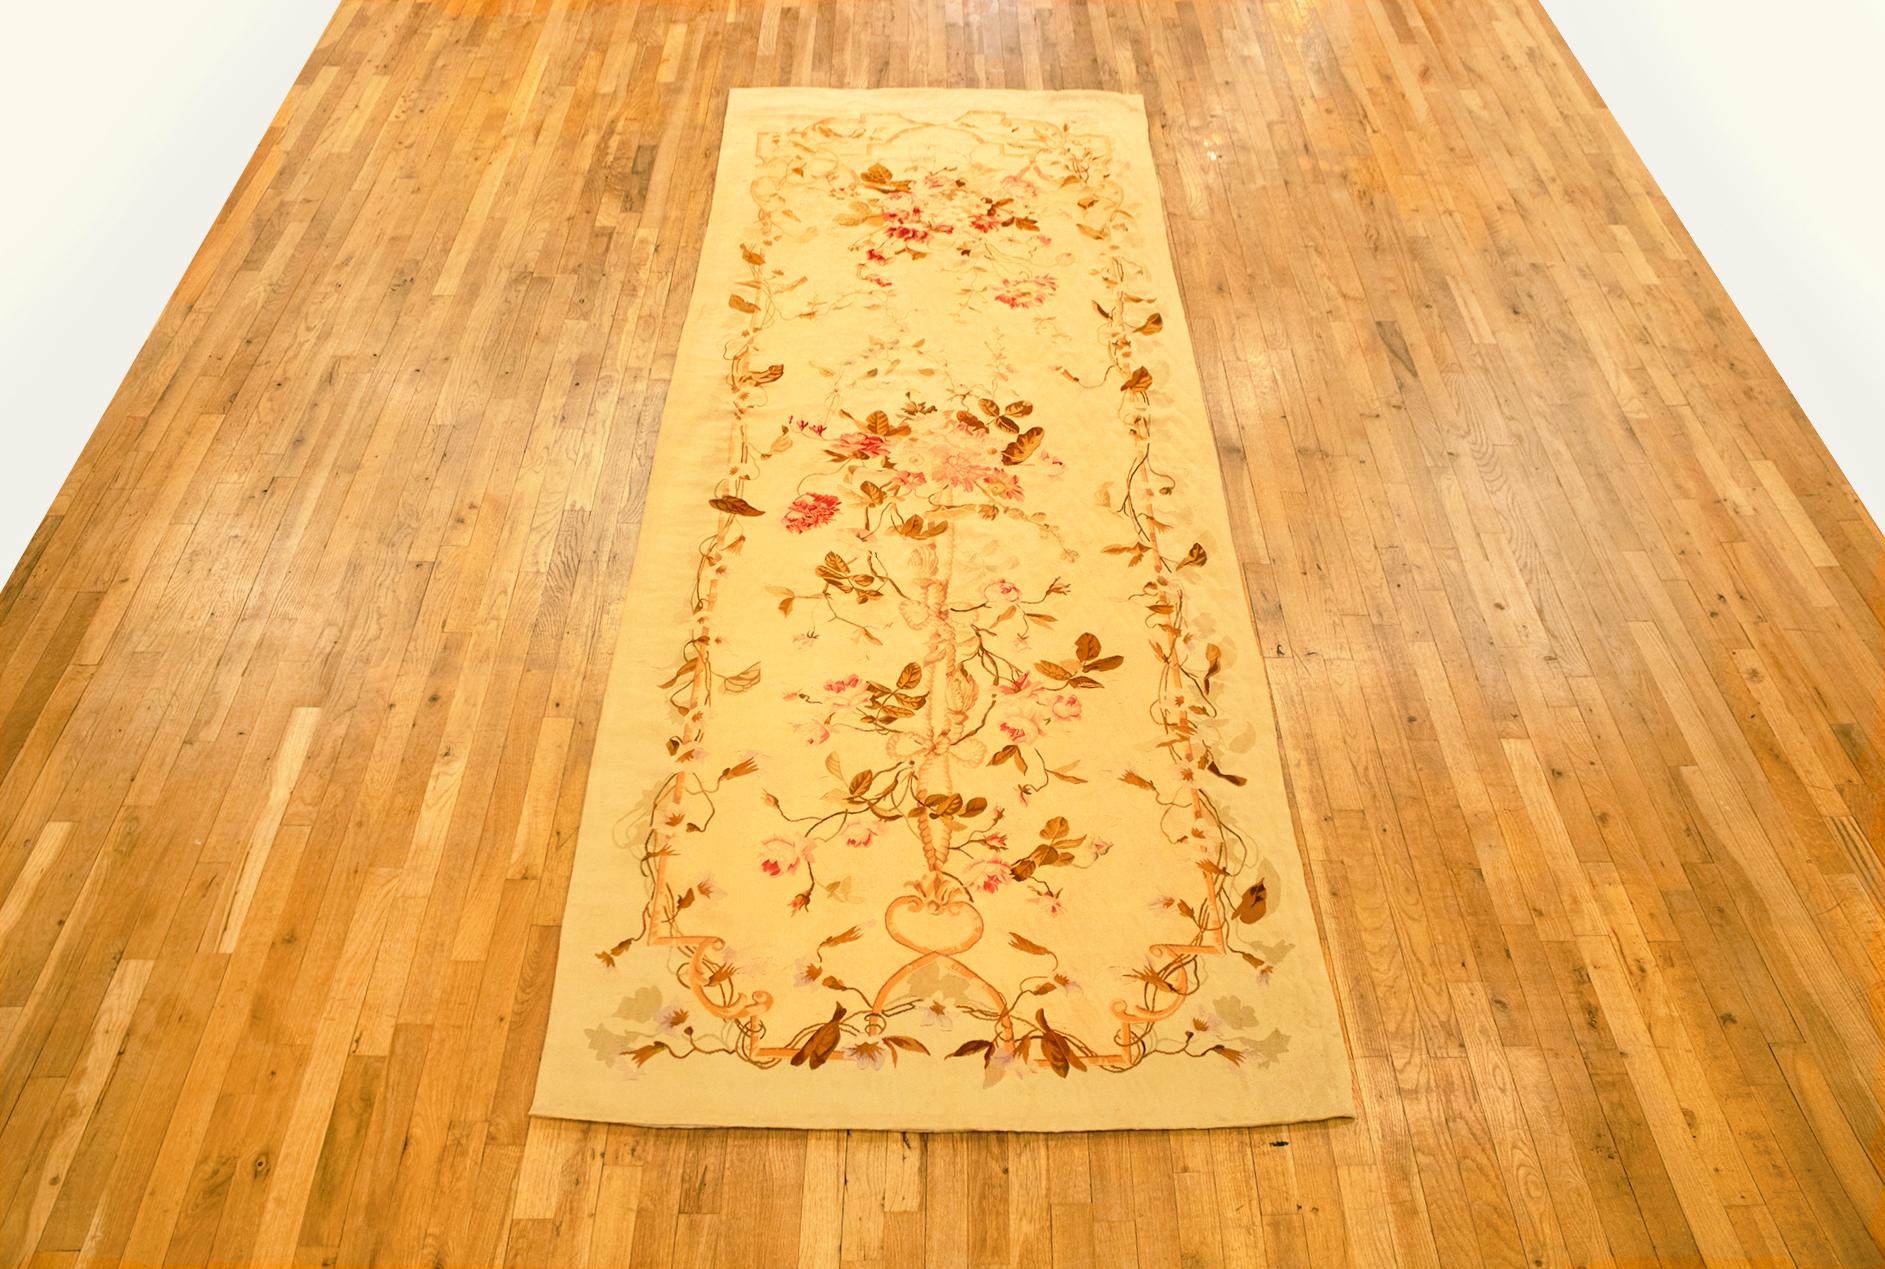 Antique French Aubusson rug, gallery size, circa 1890.

A one-of-a-kind antique French Aubusson Carpet, hand-knotted with soft wool pile. Featuring floral elements in a directional design on the ivory primary field, with a delicate rose outer